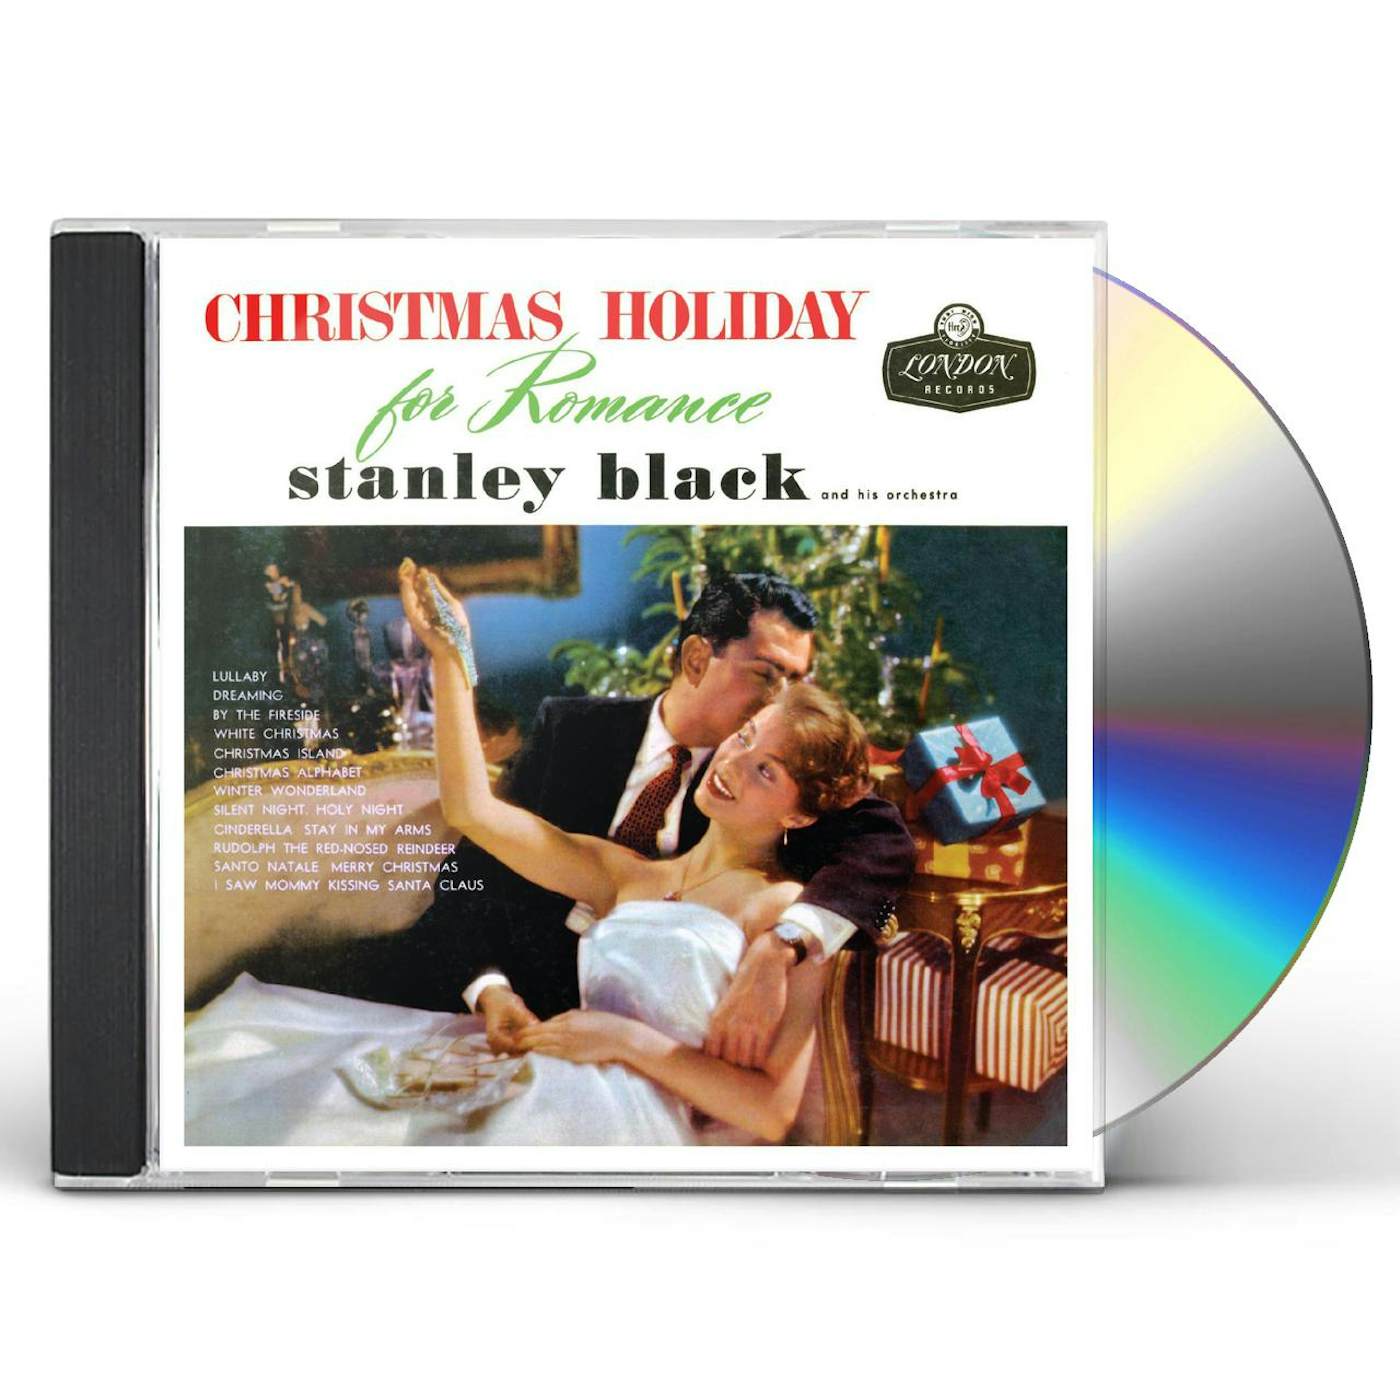 Stanley Black CHRISTMAS HOLIDAY FOR ROMANCE CD